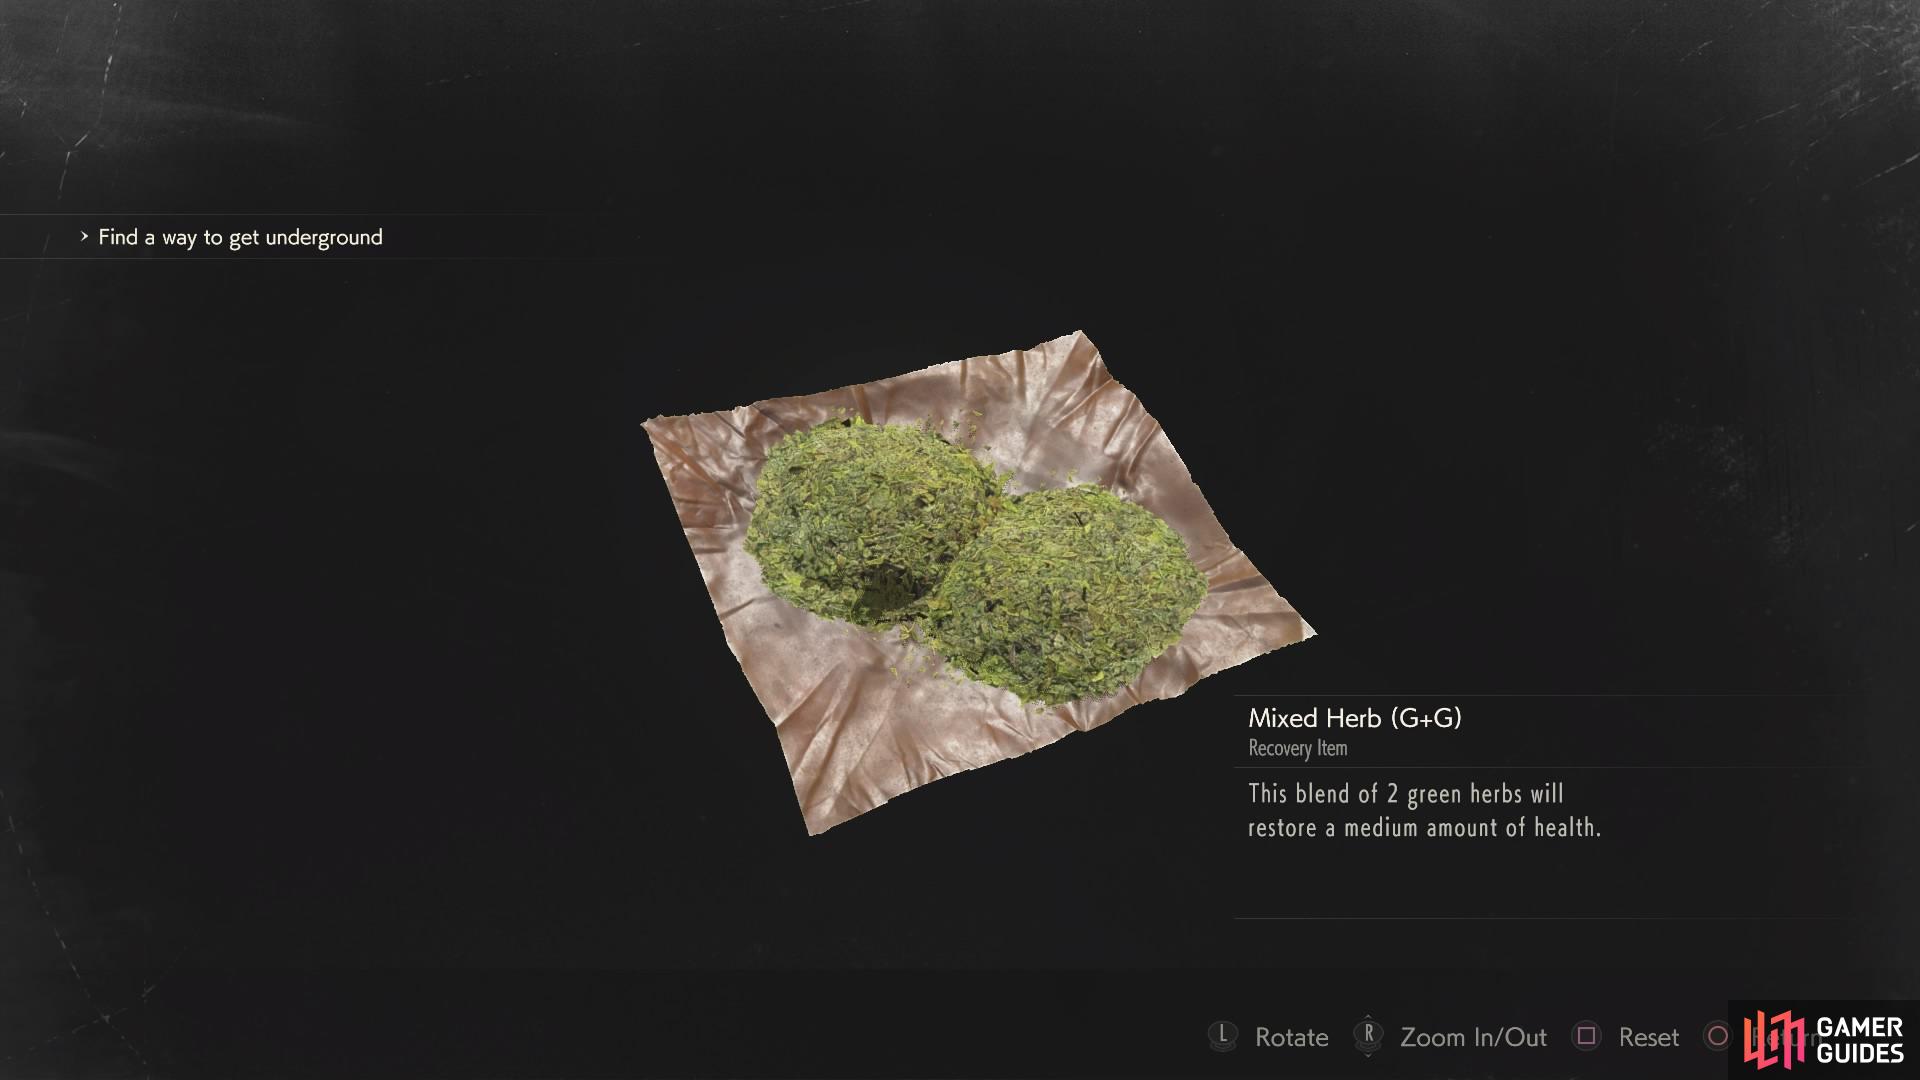 Combine two Green Herbs in your inventory to receive the Mixed Herb